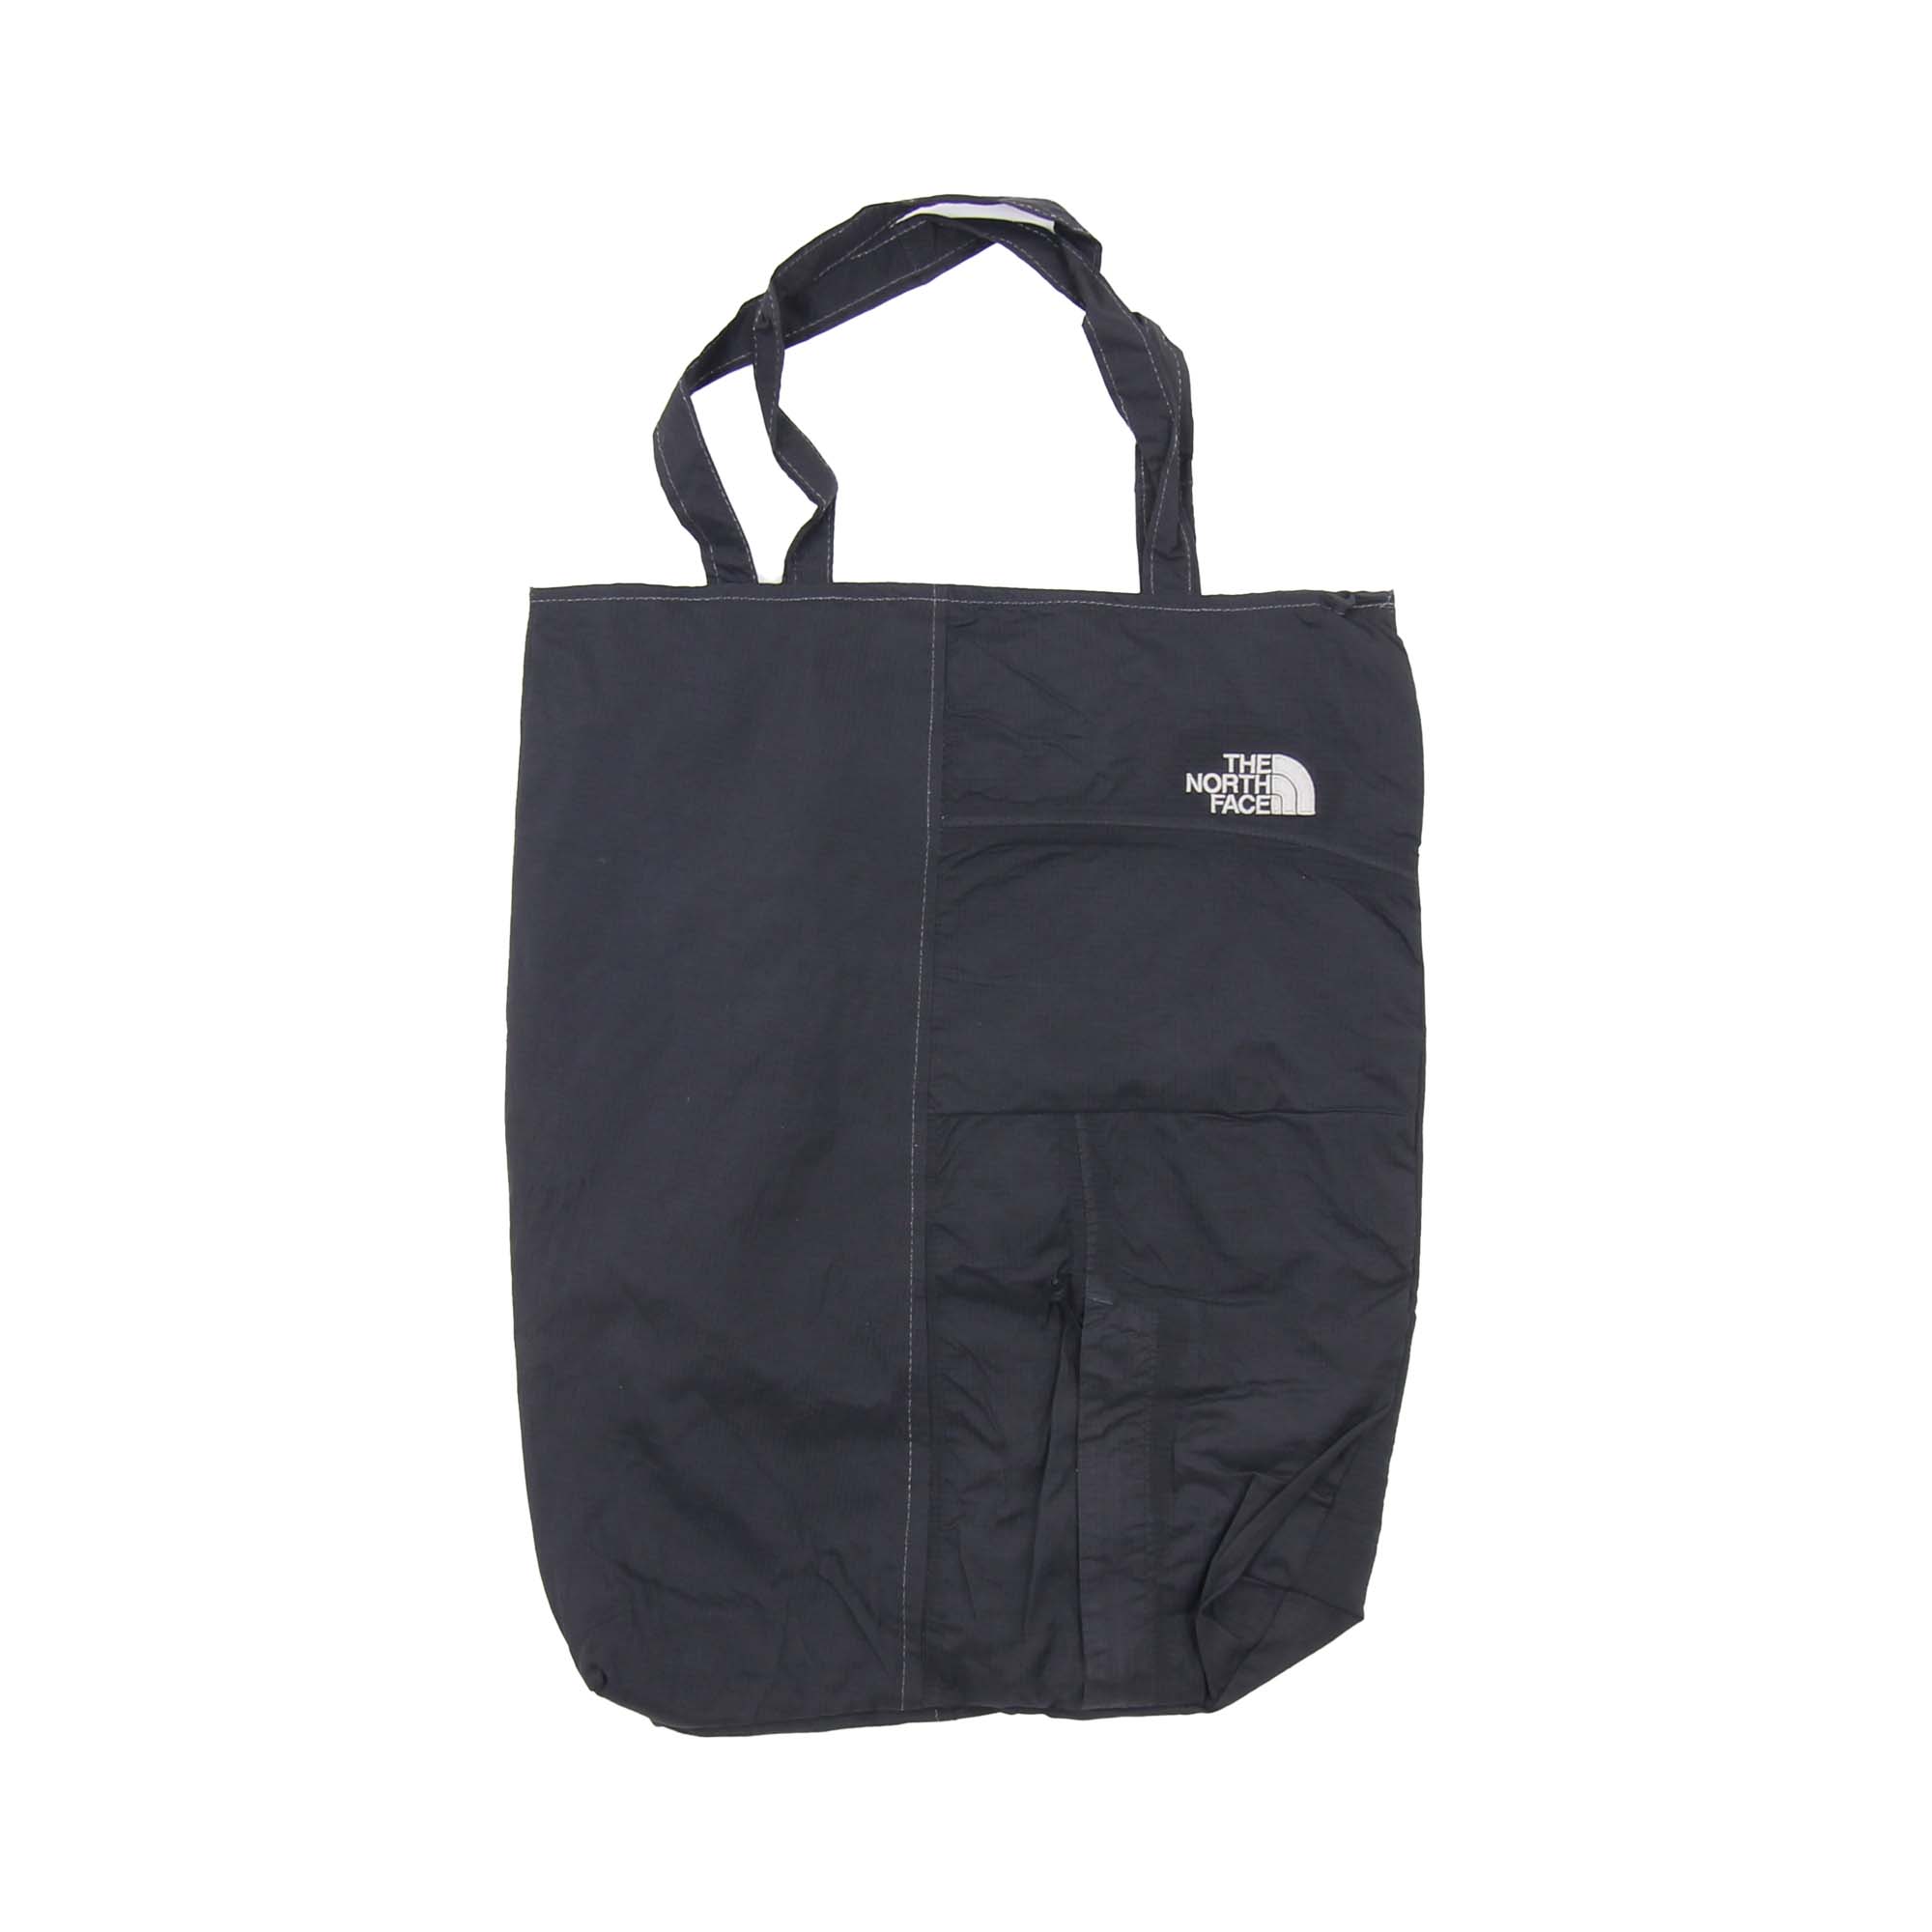 The North Face Rework Bag